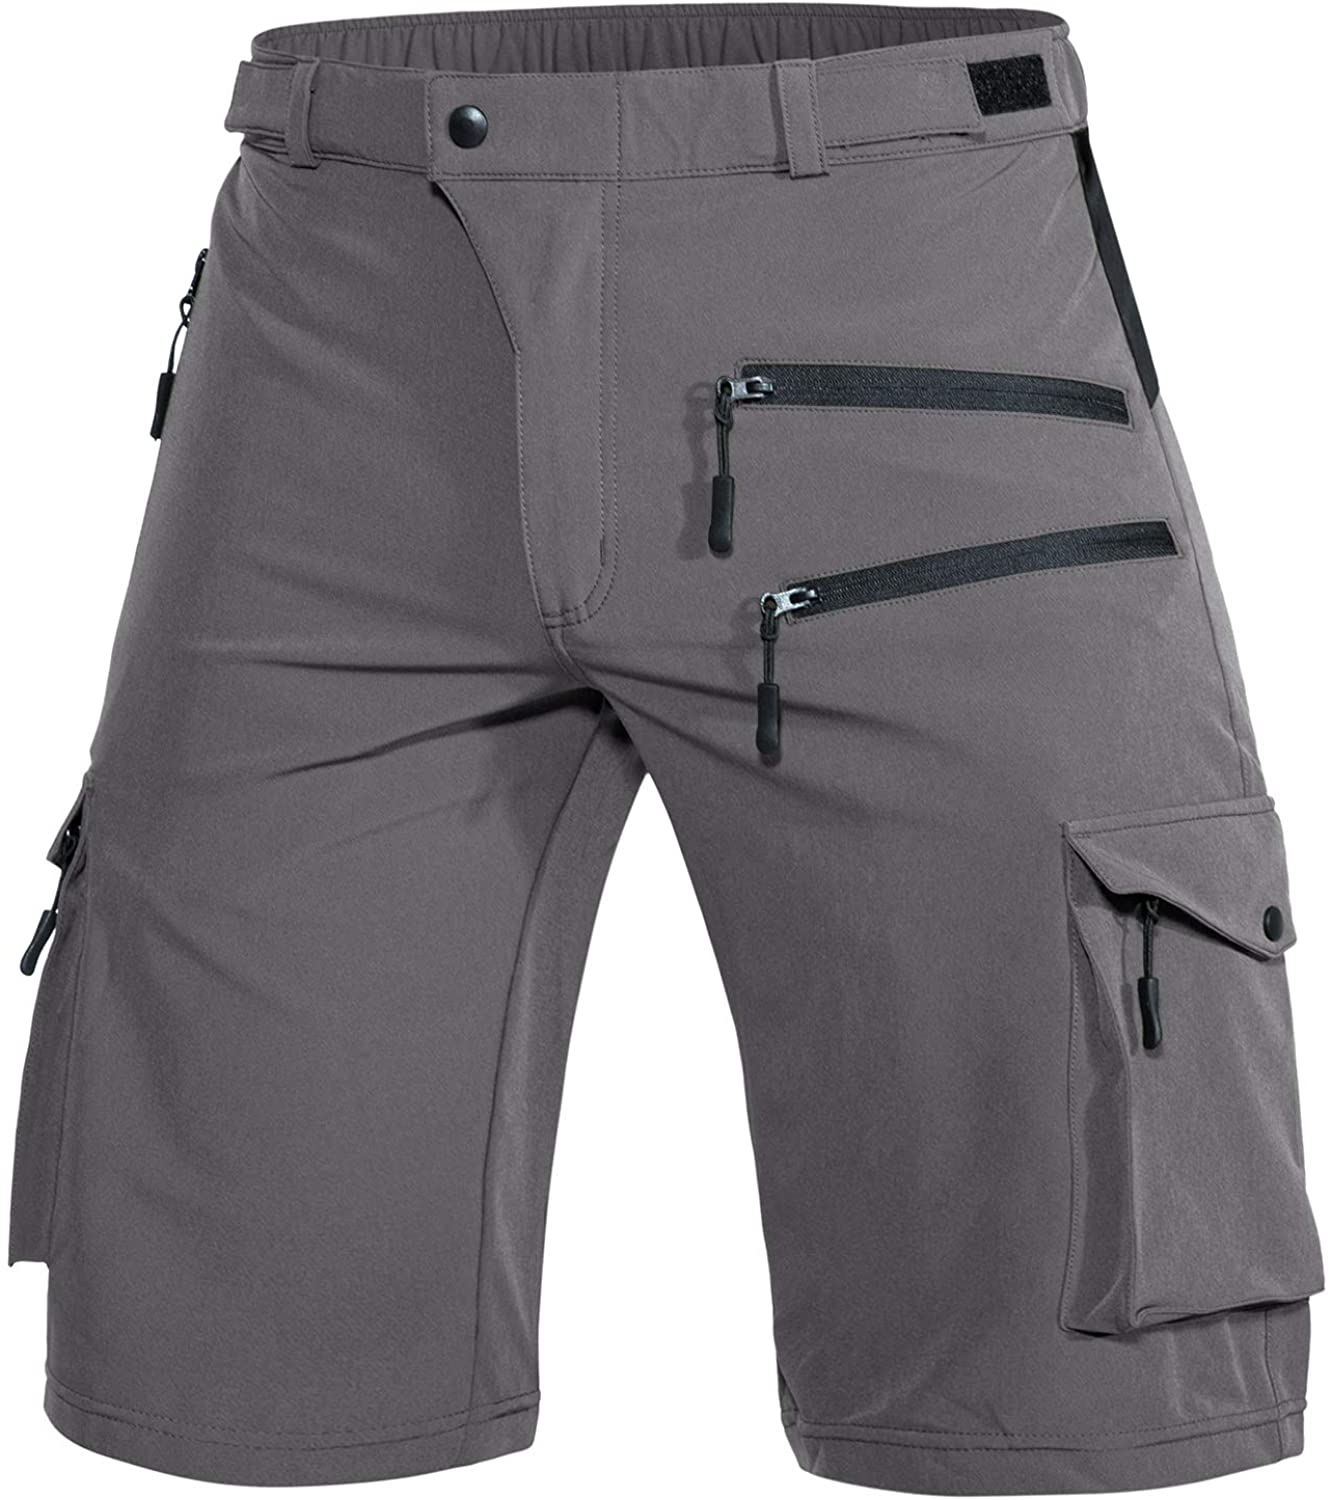 Wespornow Men's-Hiking-Shorts Tactical Shorts Lightweight-Quick-Dry-Outdoor-Cargo-Casual-Shorts for Hiking Cycling 